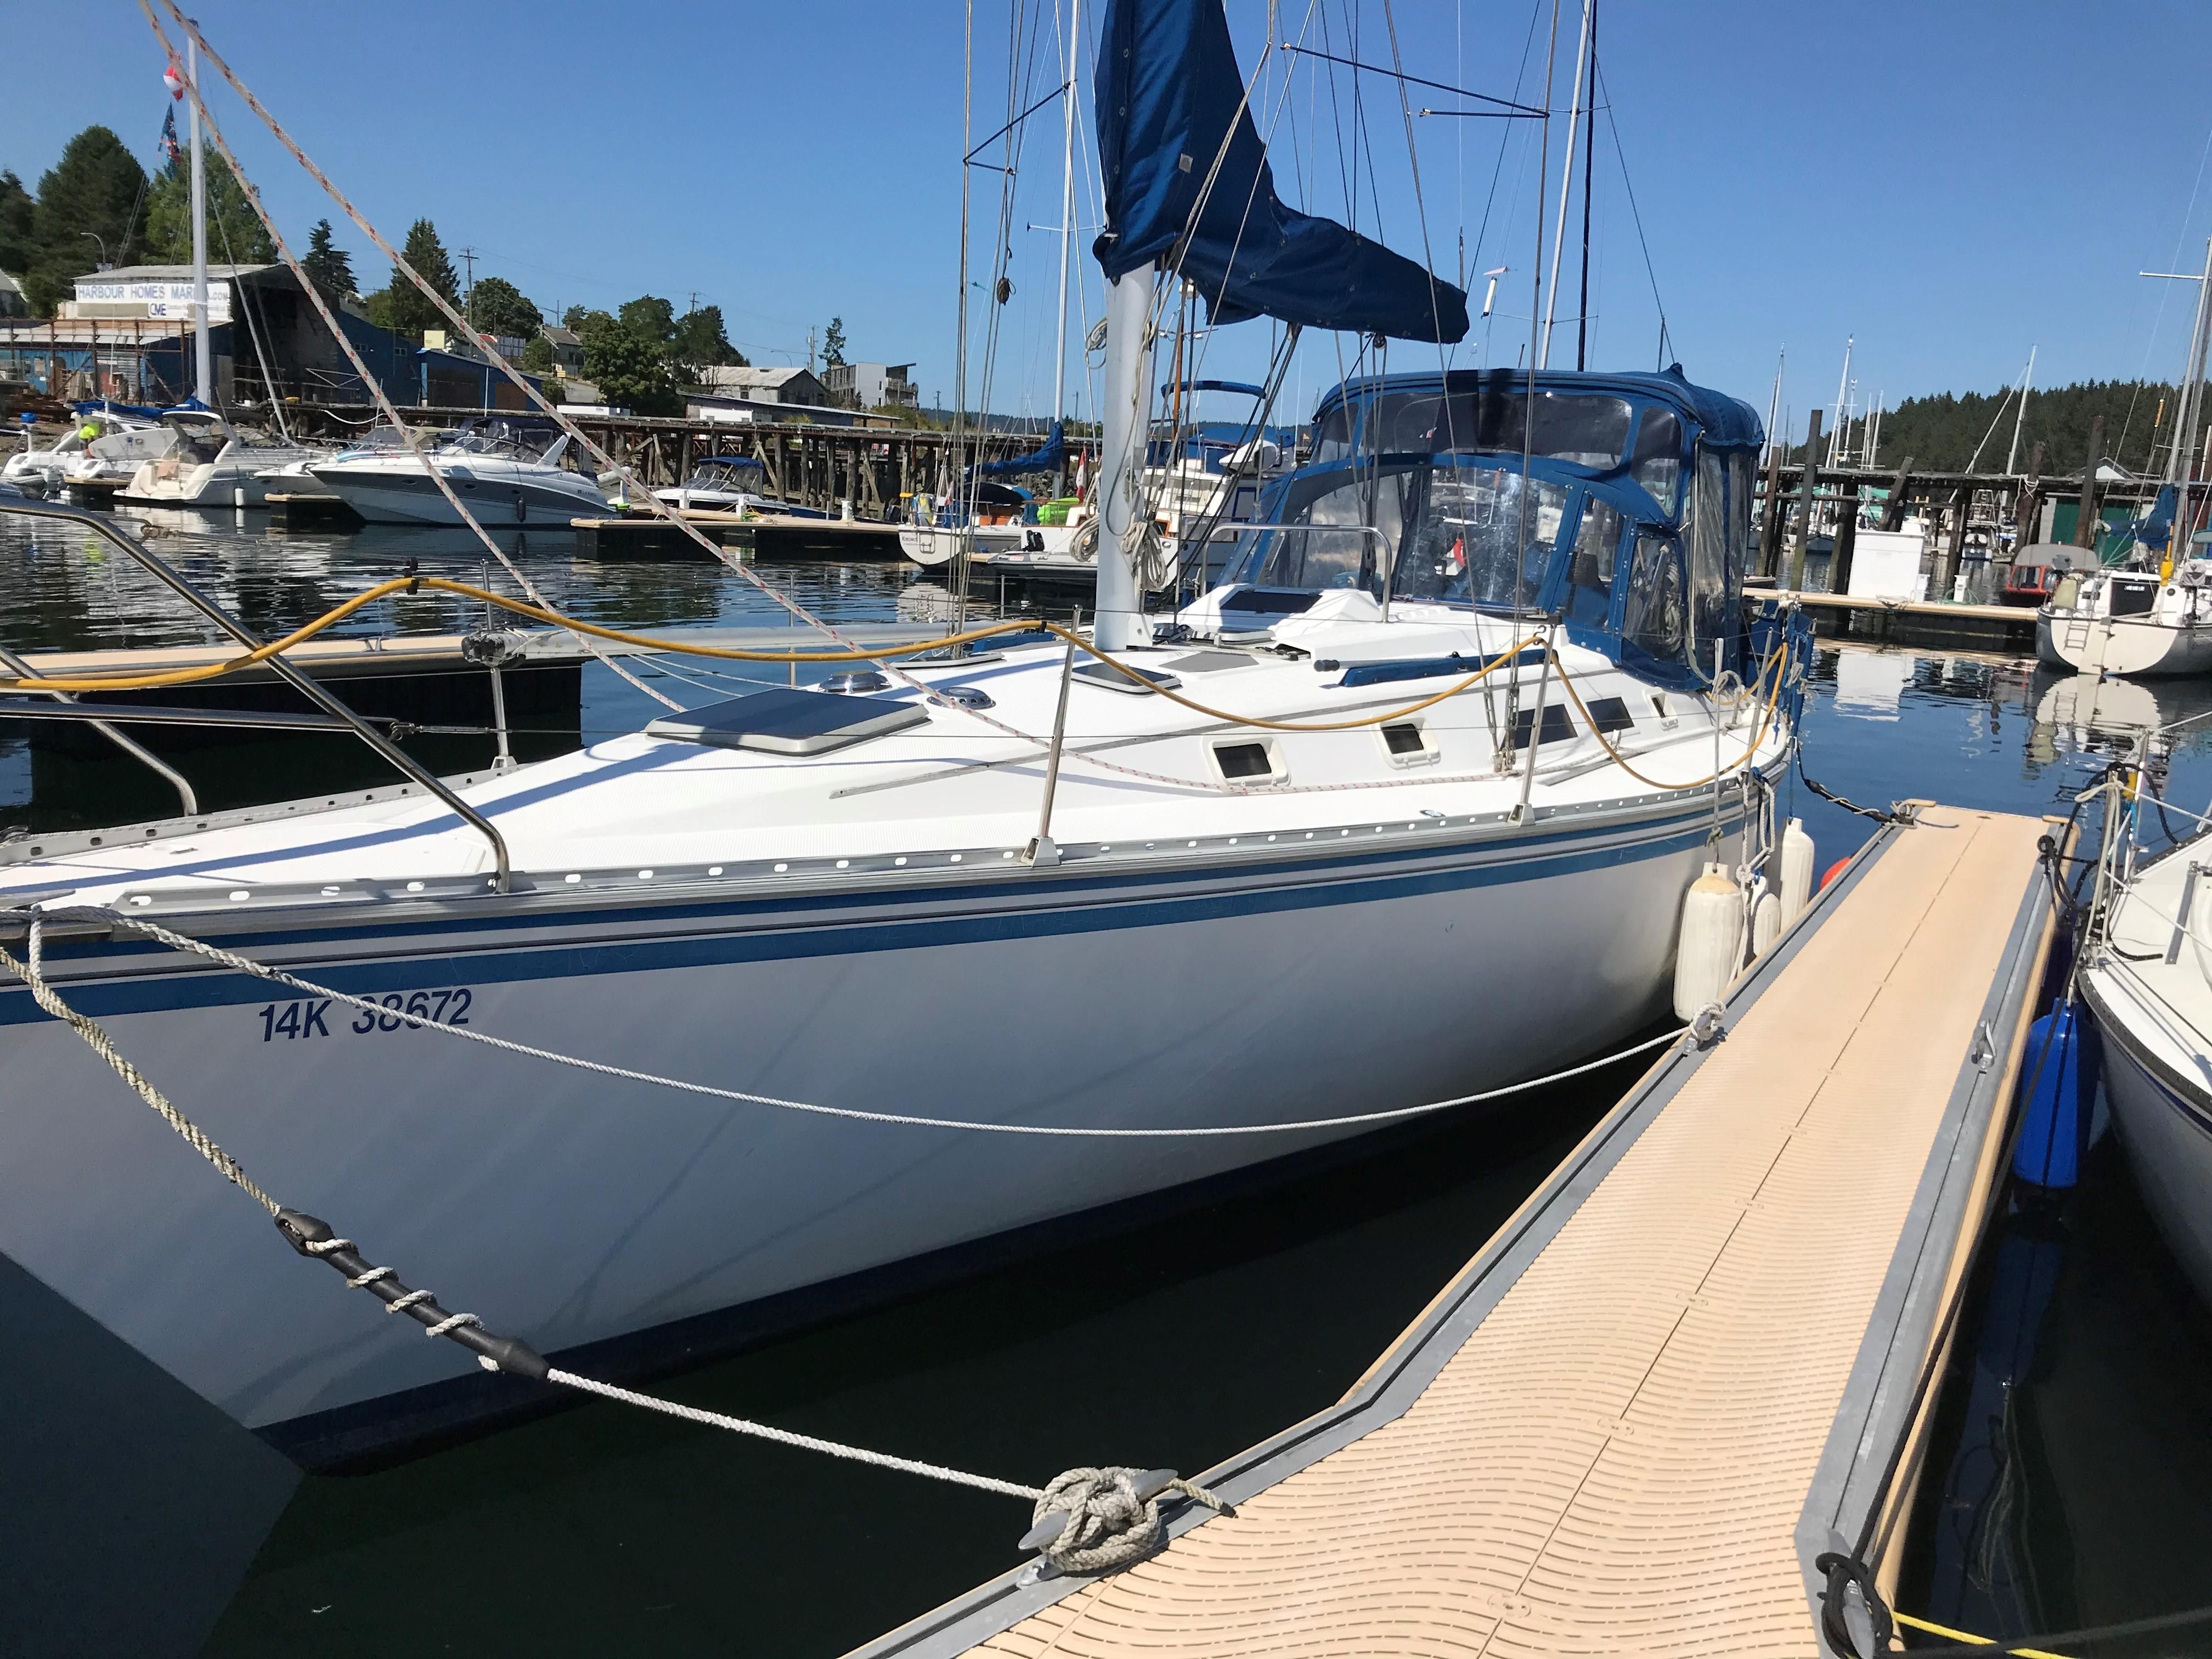 34 ft sailing yacht for sale